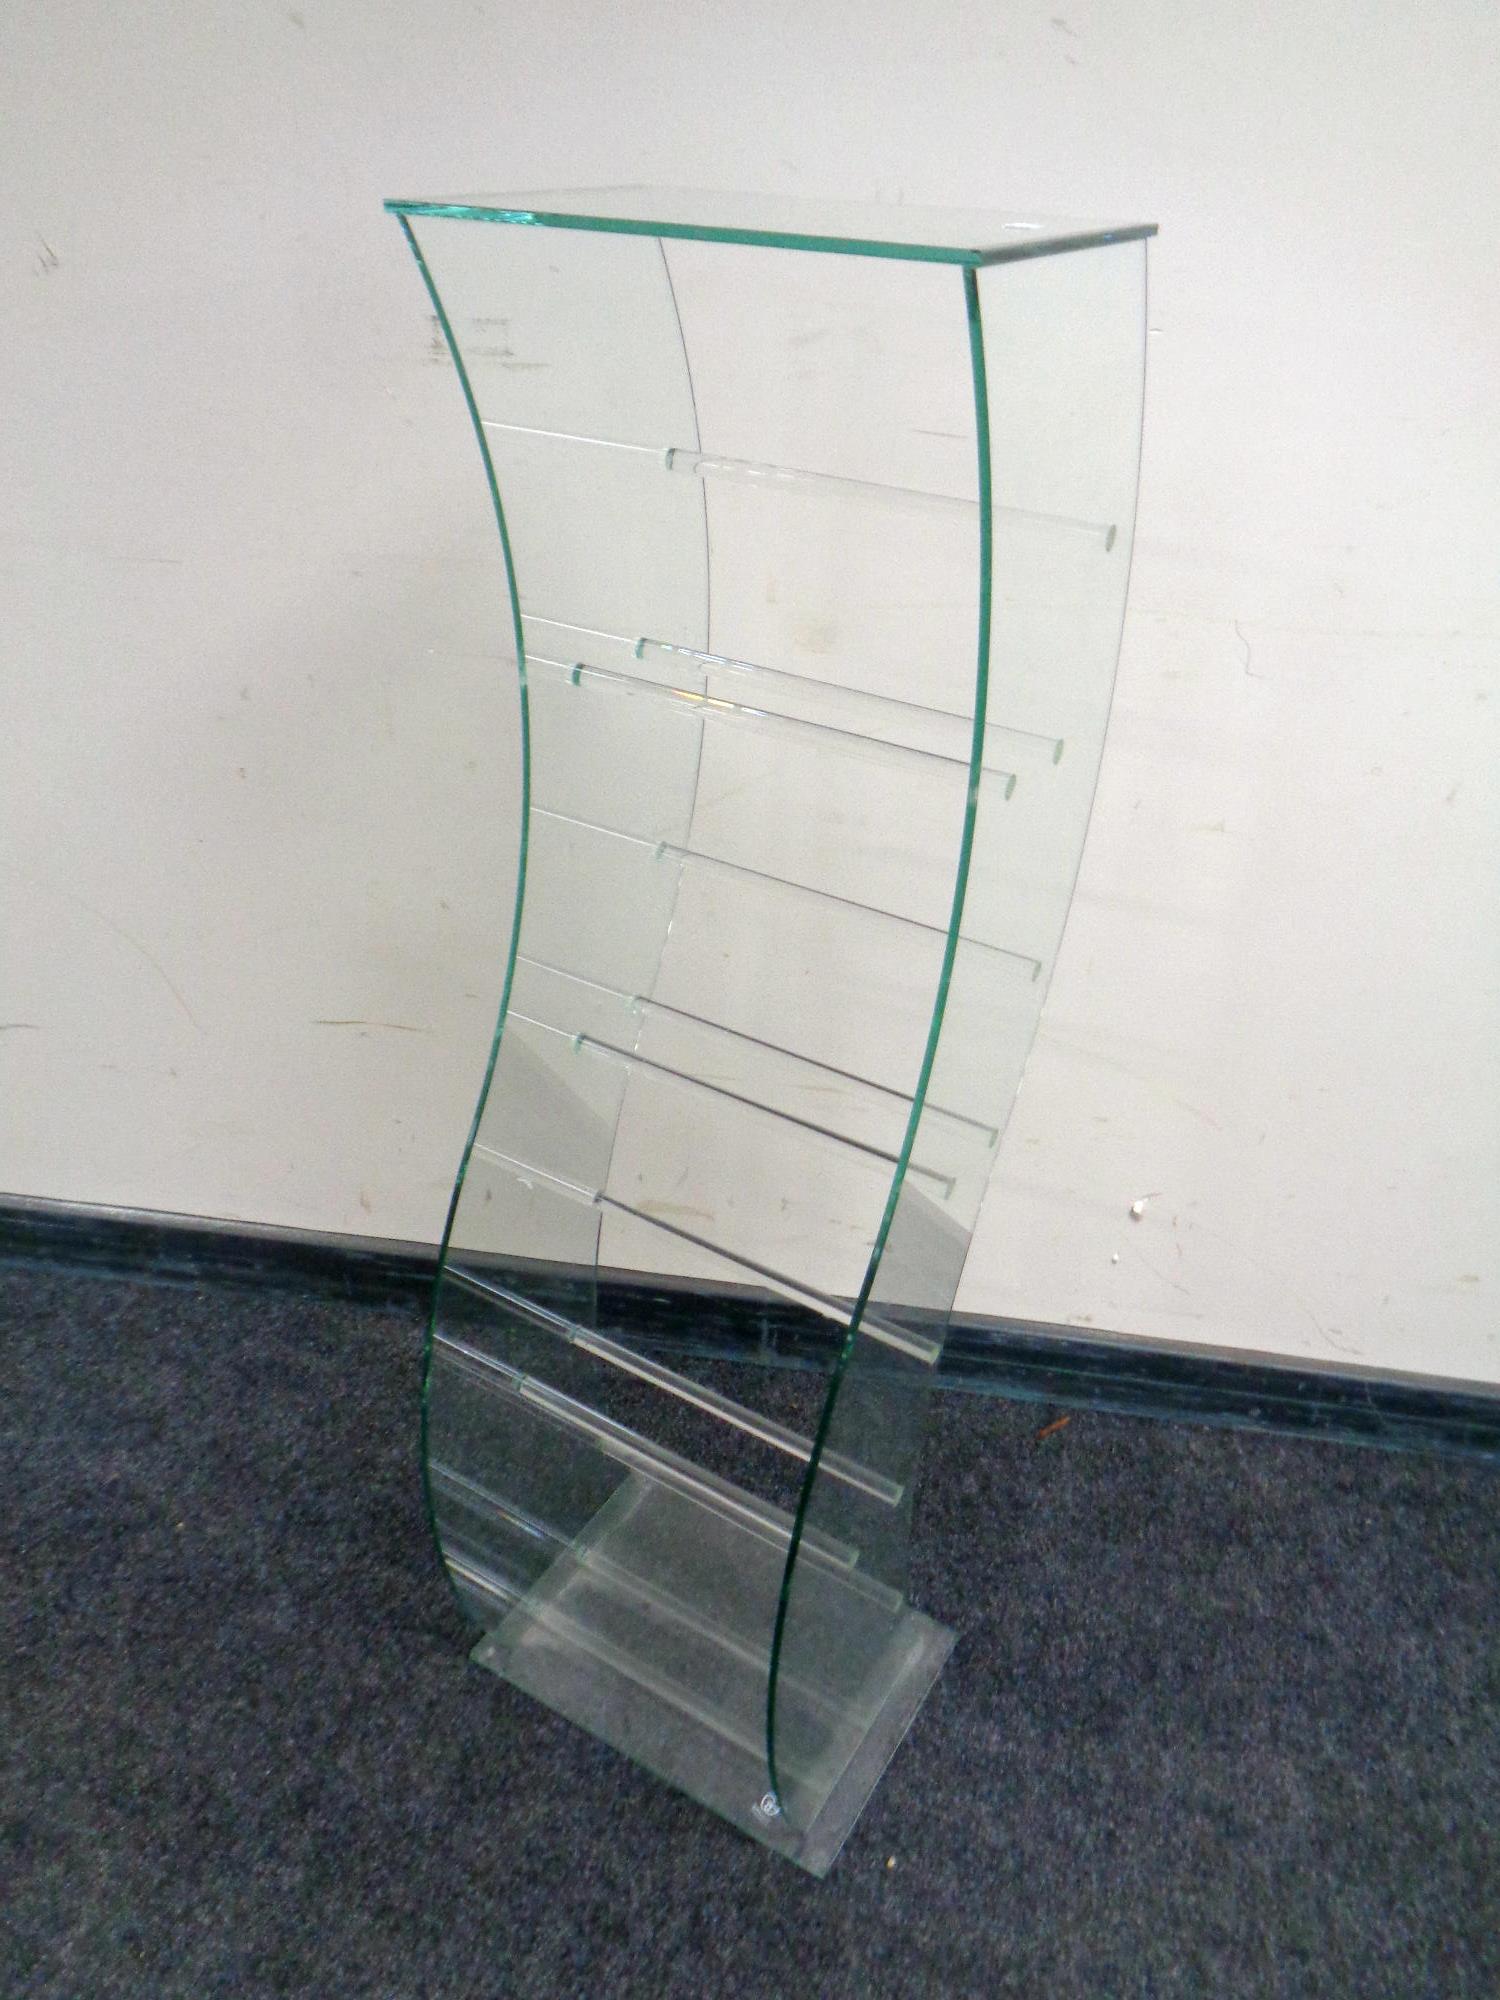 A glass media stand.